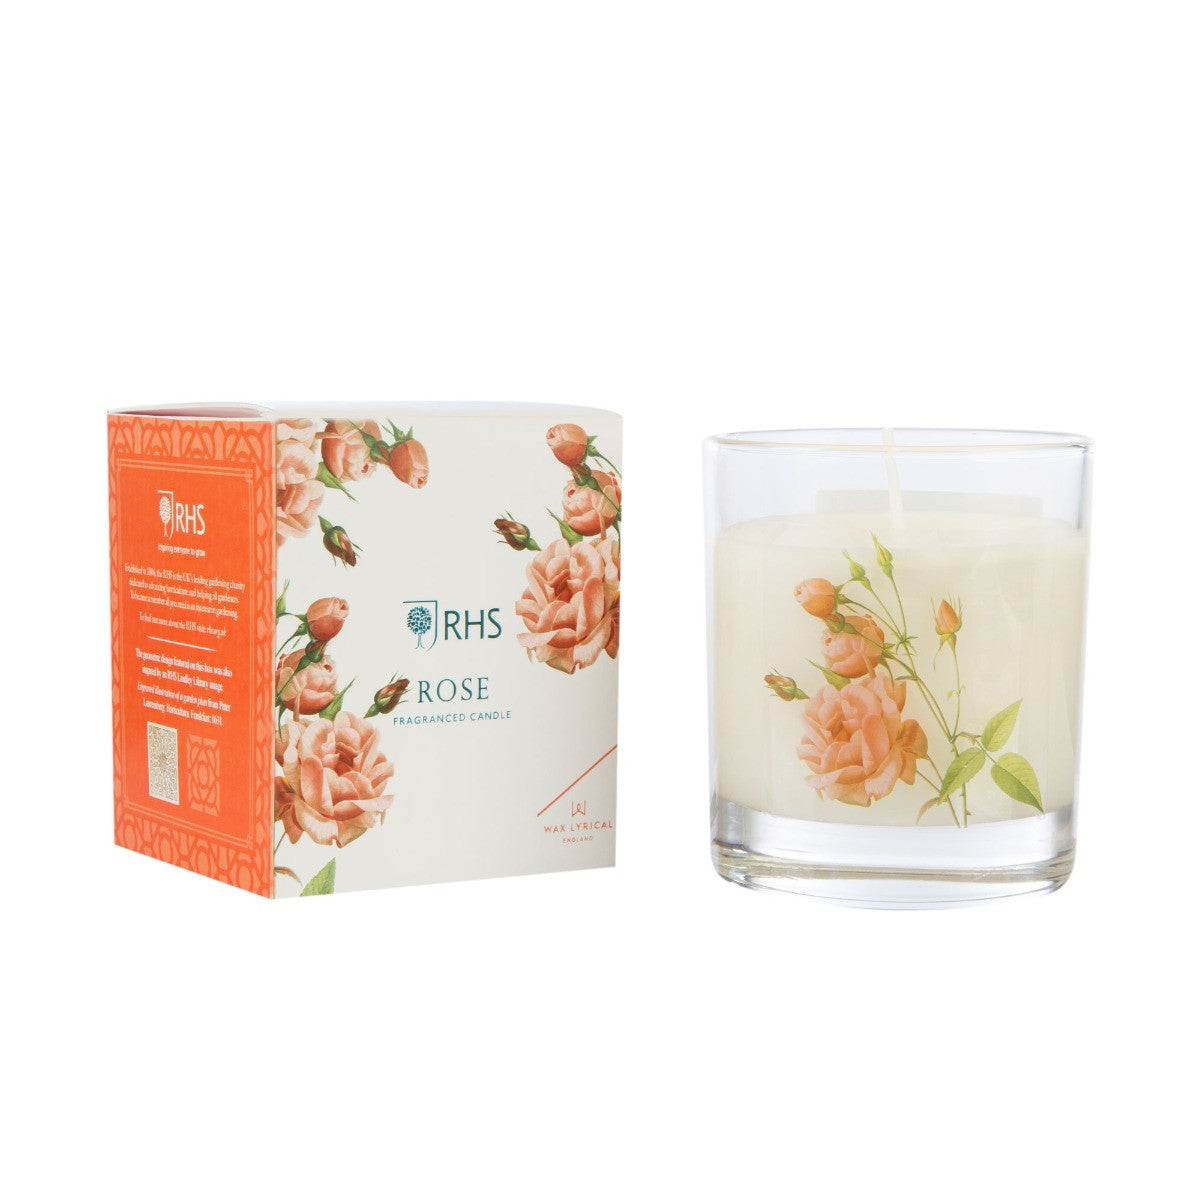 RHS Fragrant Garden Rose Candle by Wax Lyrical. Made in England.